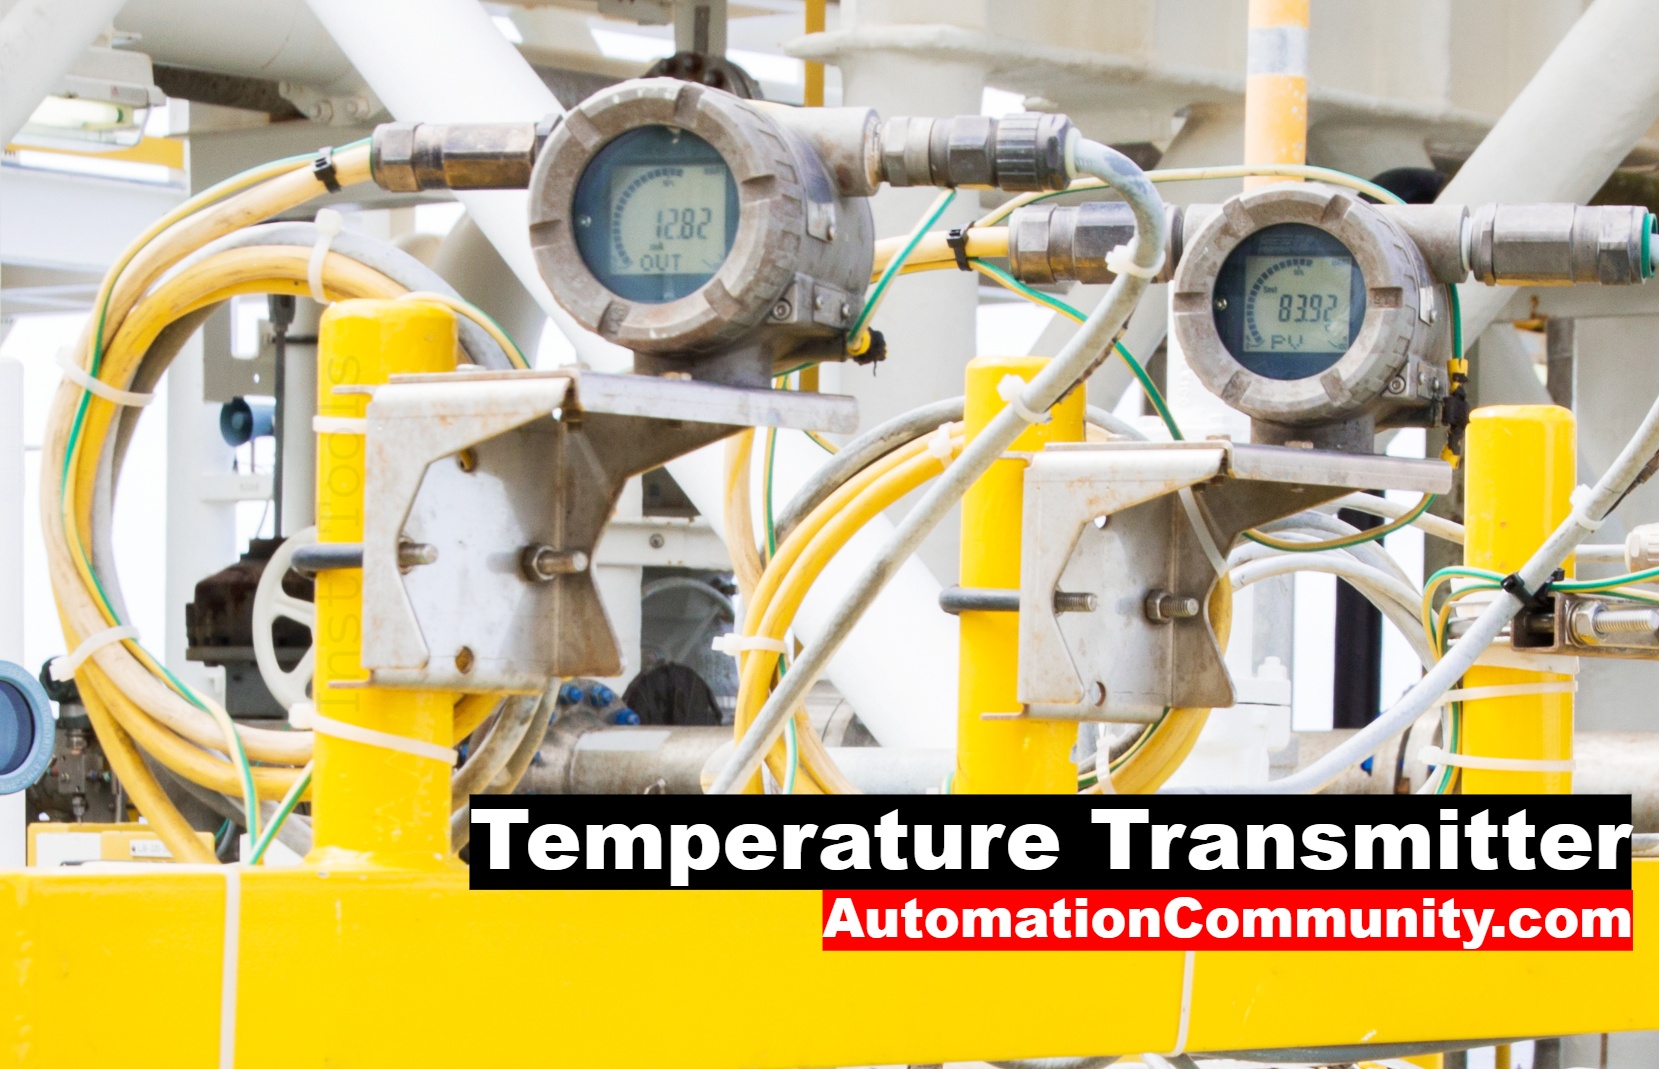 Temperature Transmitter Questions and Answers - Instruments